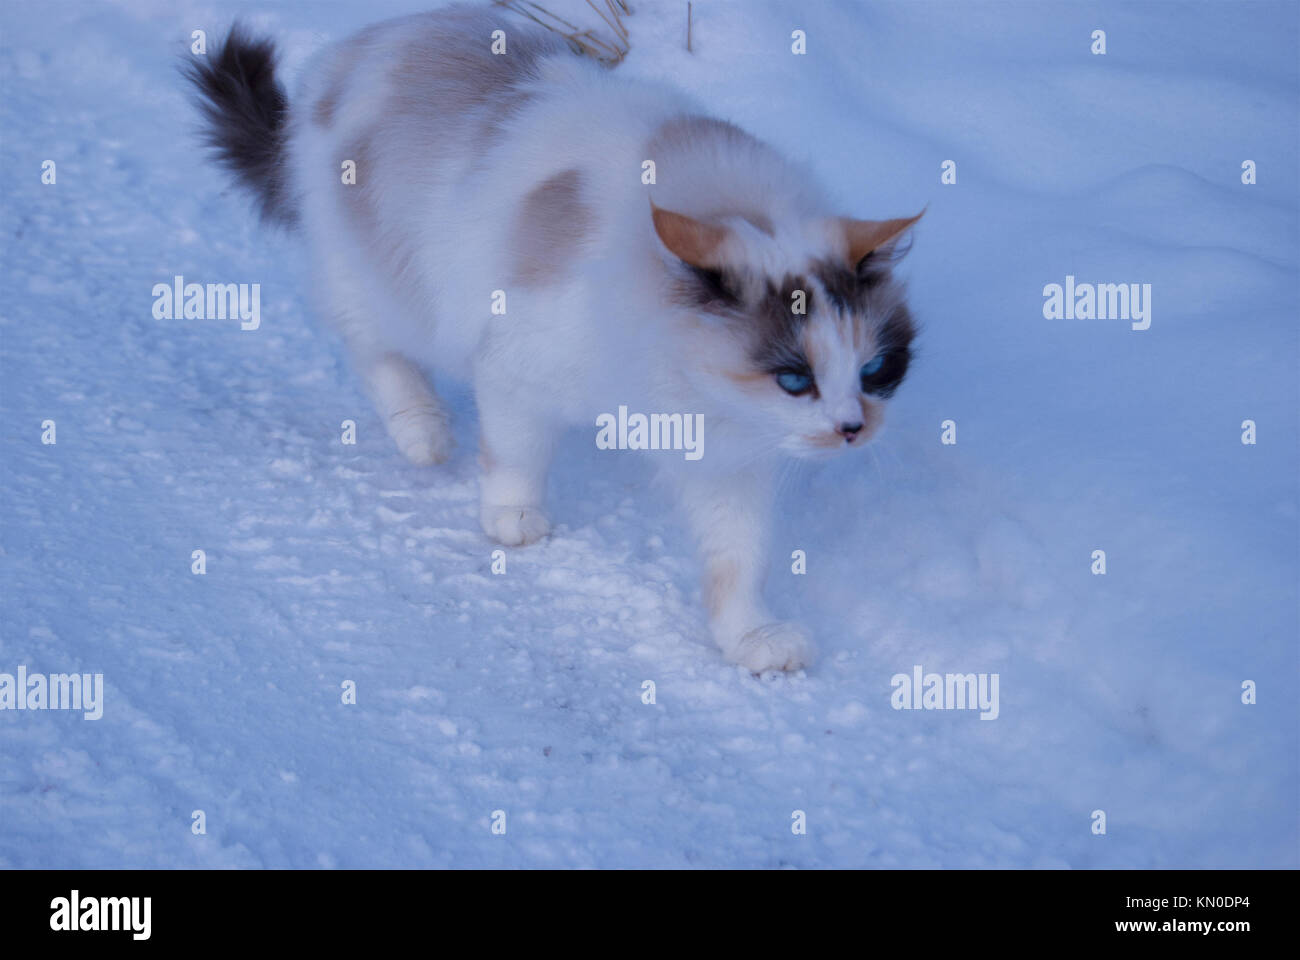 An unusual three-colored cat with blue eyes walking on the snow Stock Photo